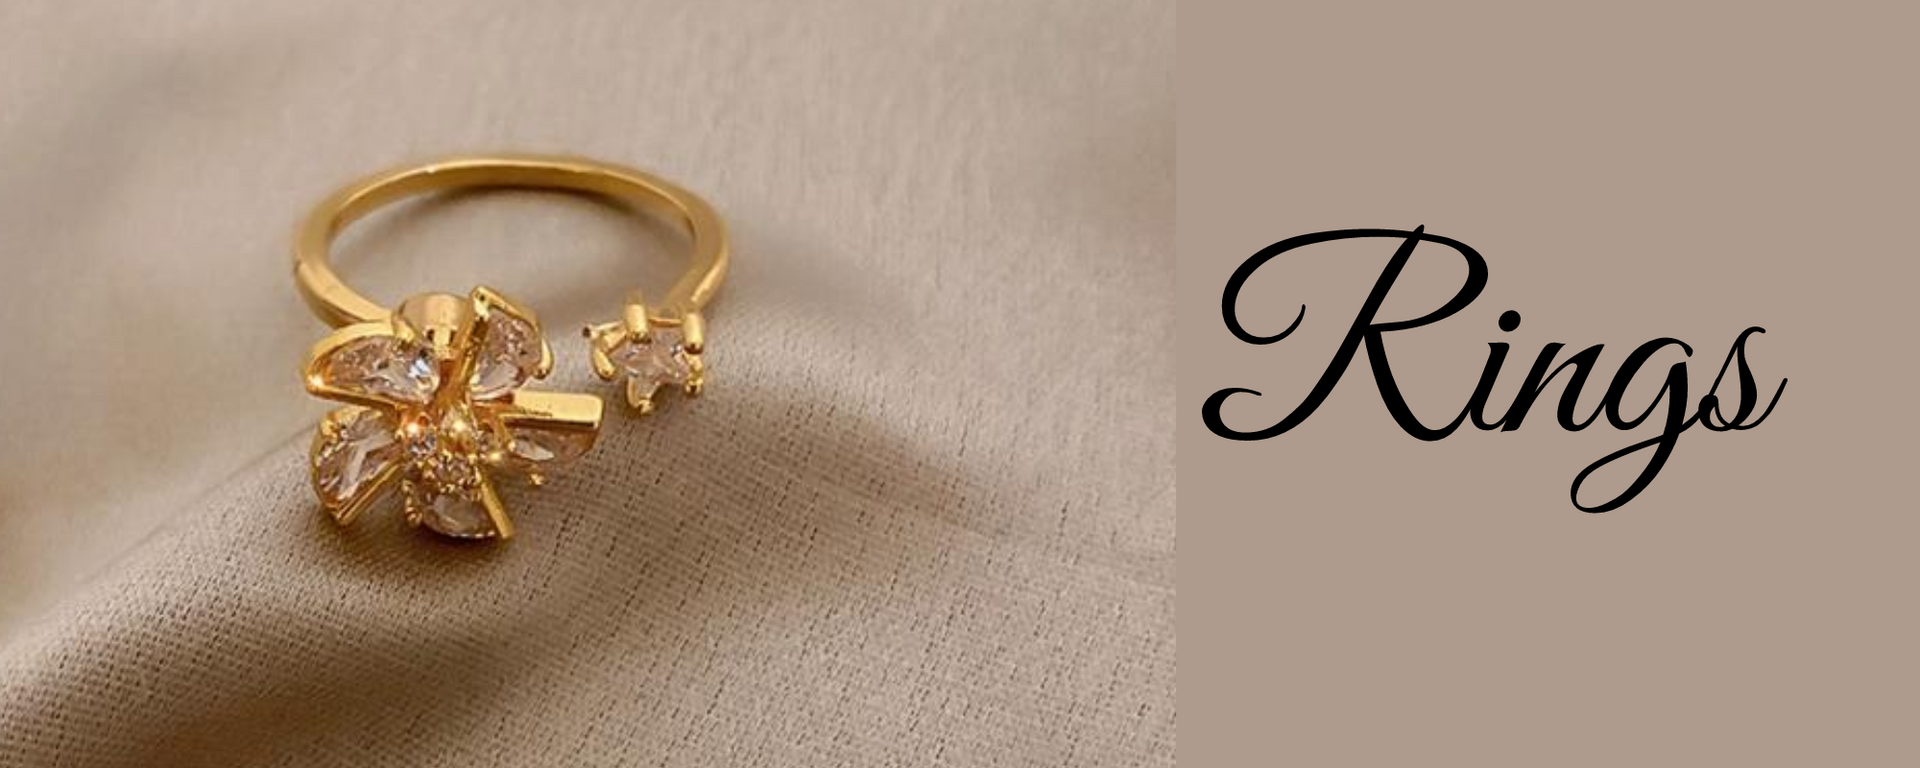 ..put a ring on it! Shop Rings at T&J